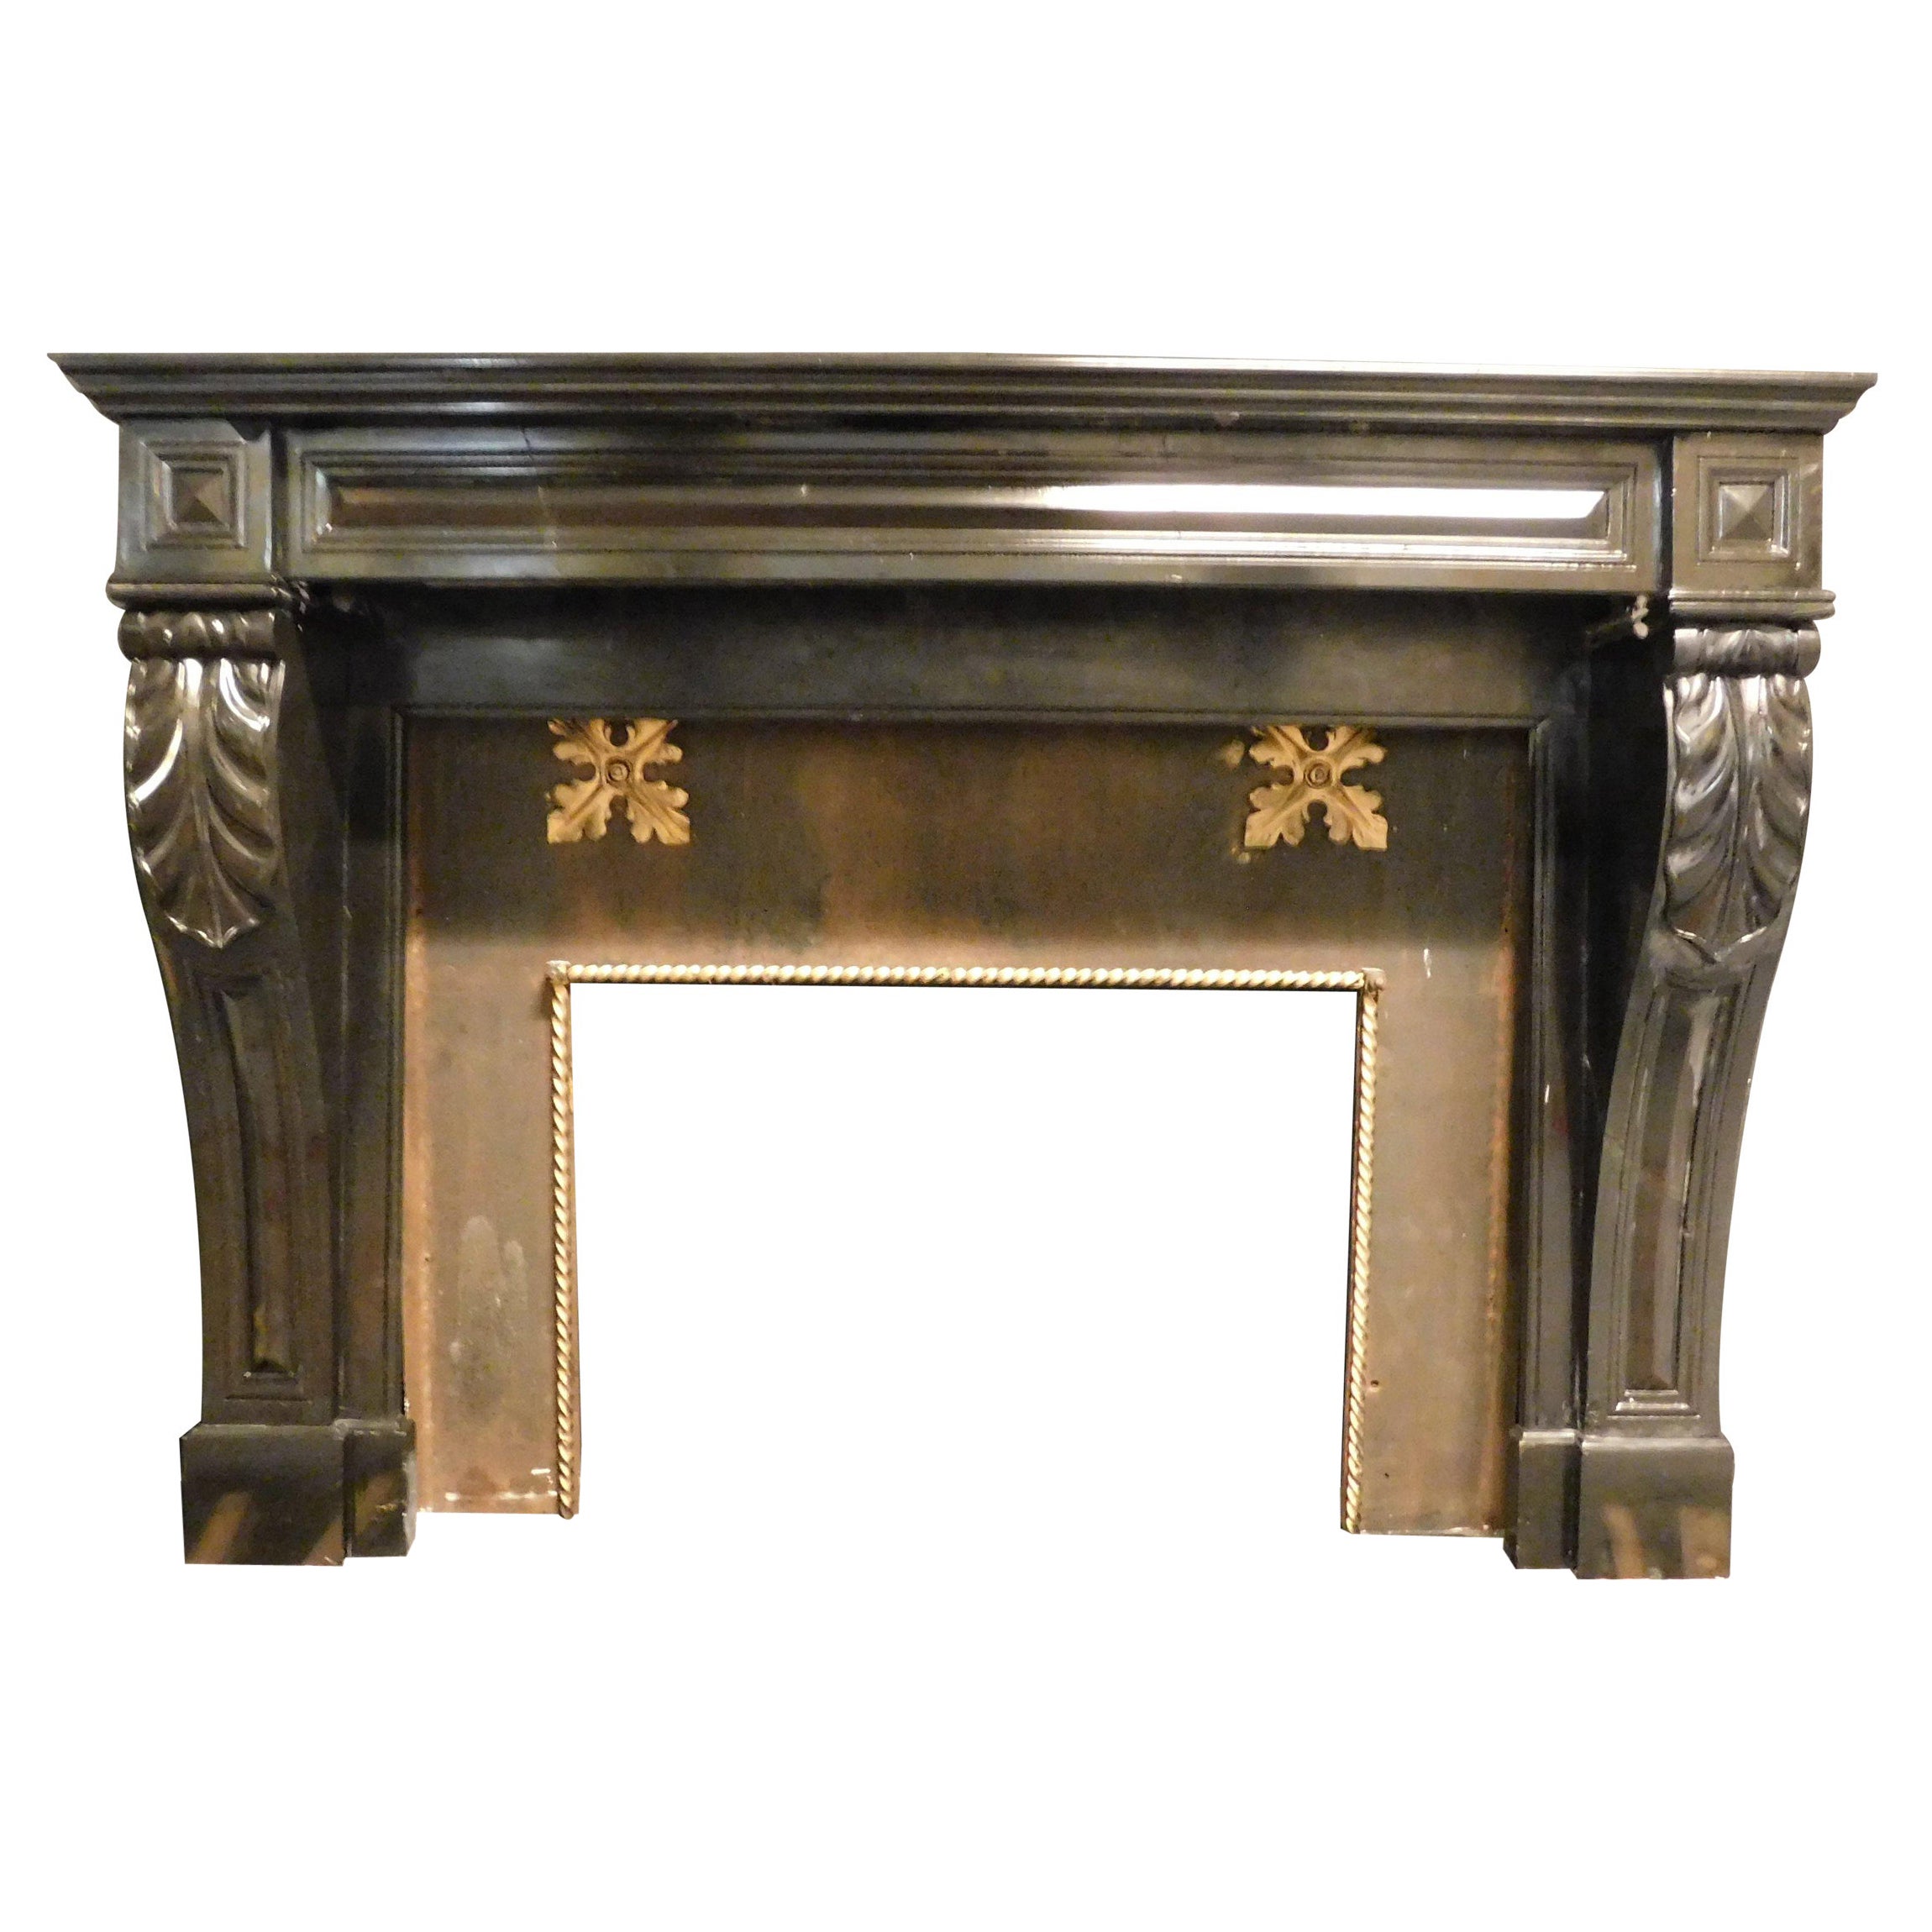 Ancient Fireplace in Carved Black Marble, from the 19th Century, Italy